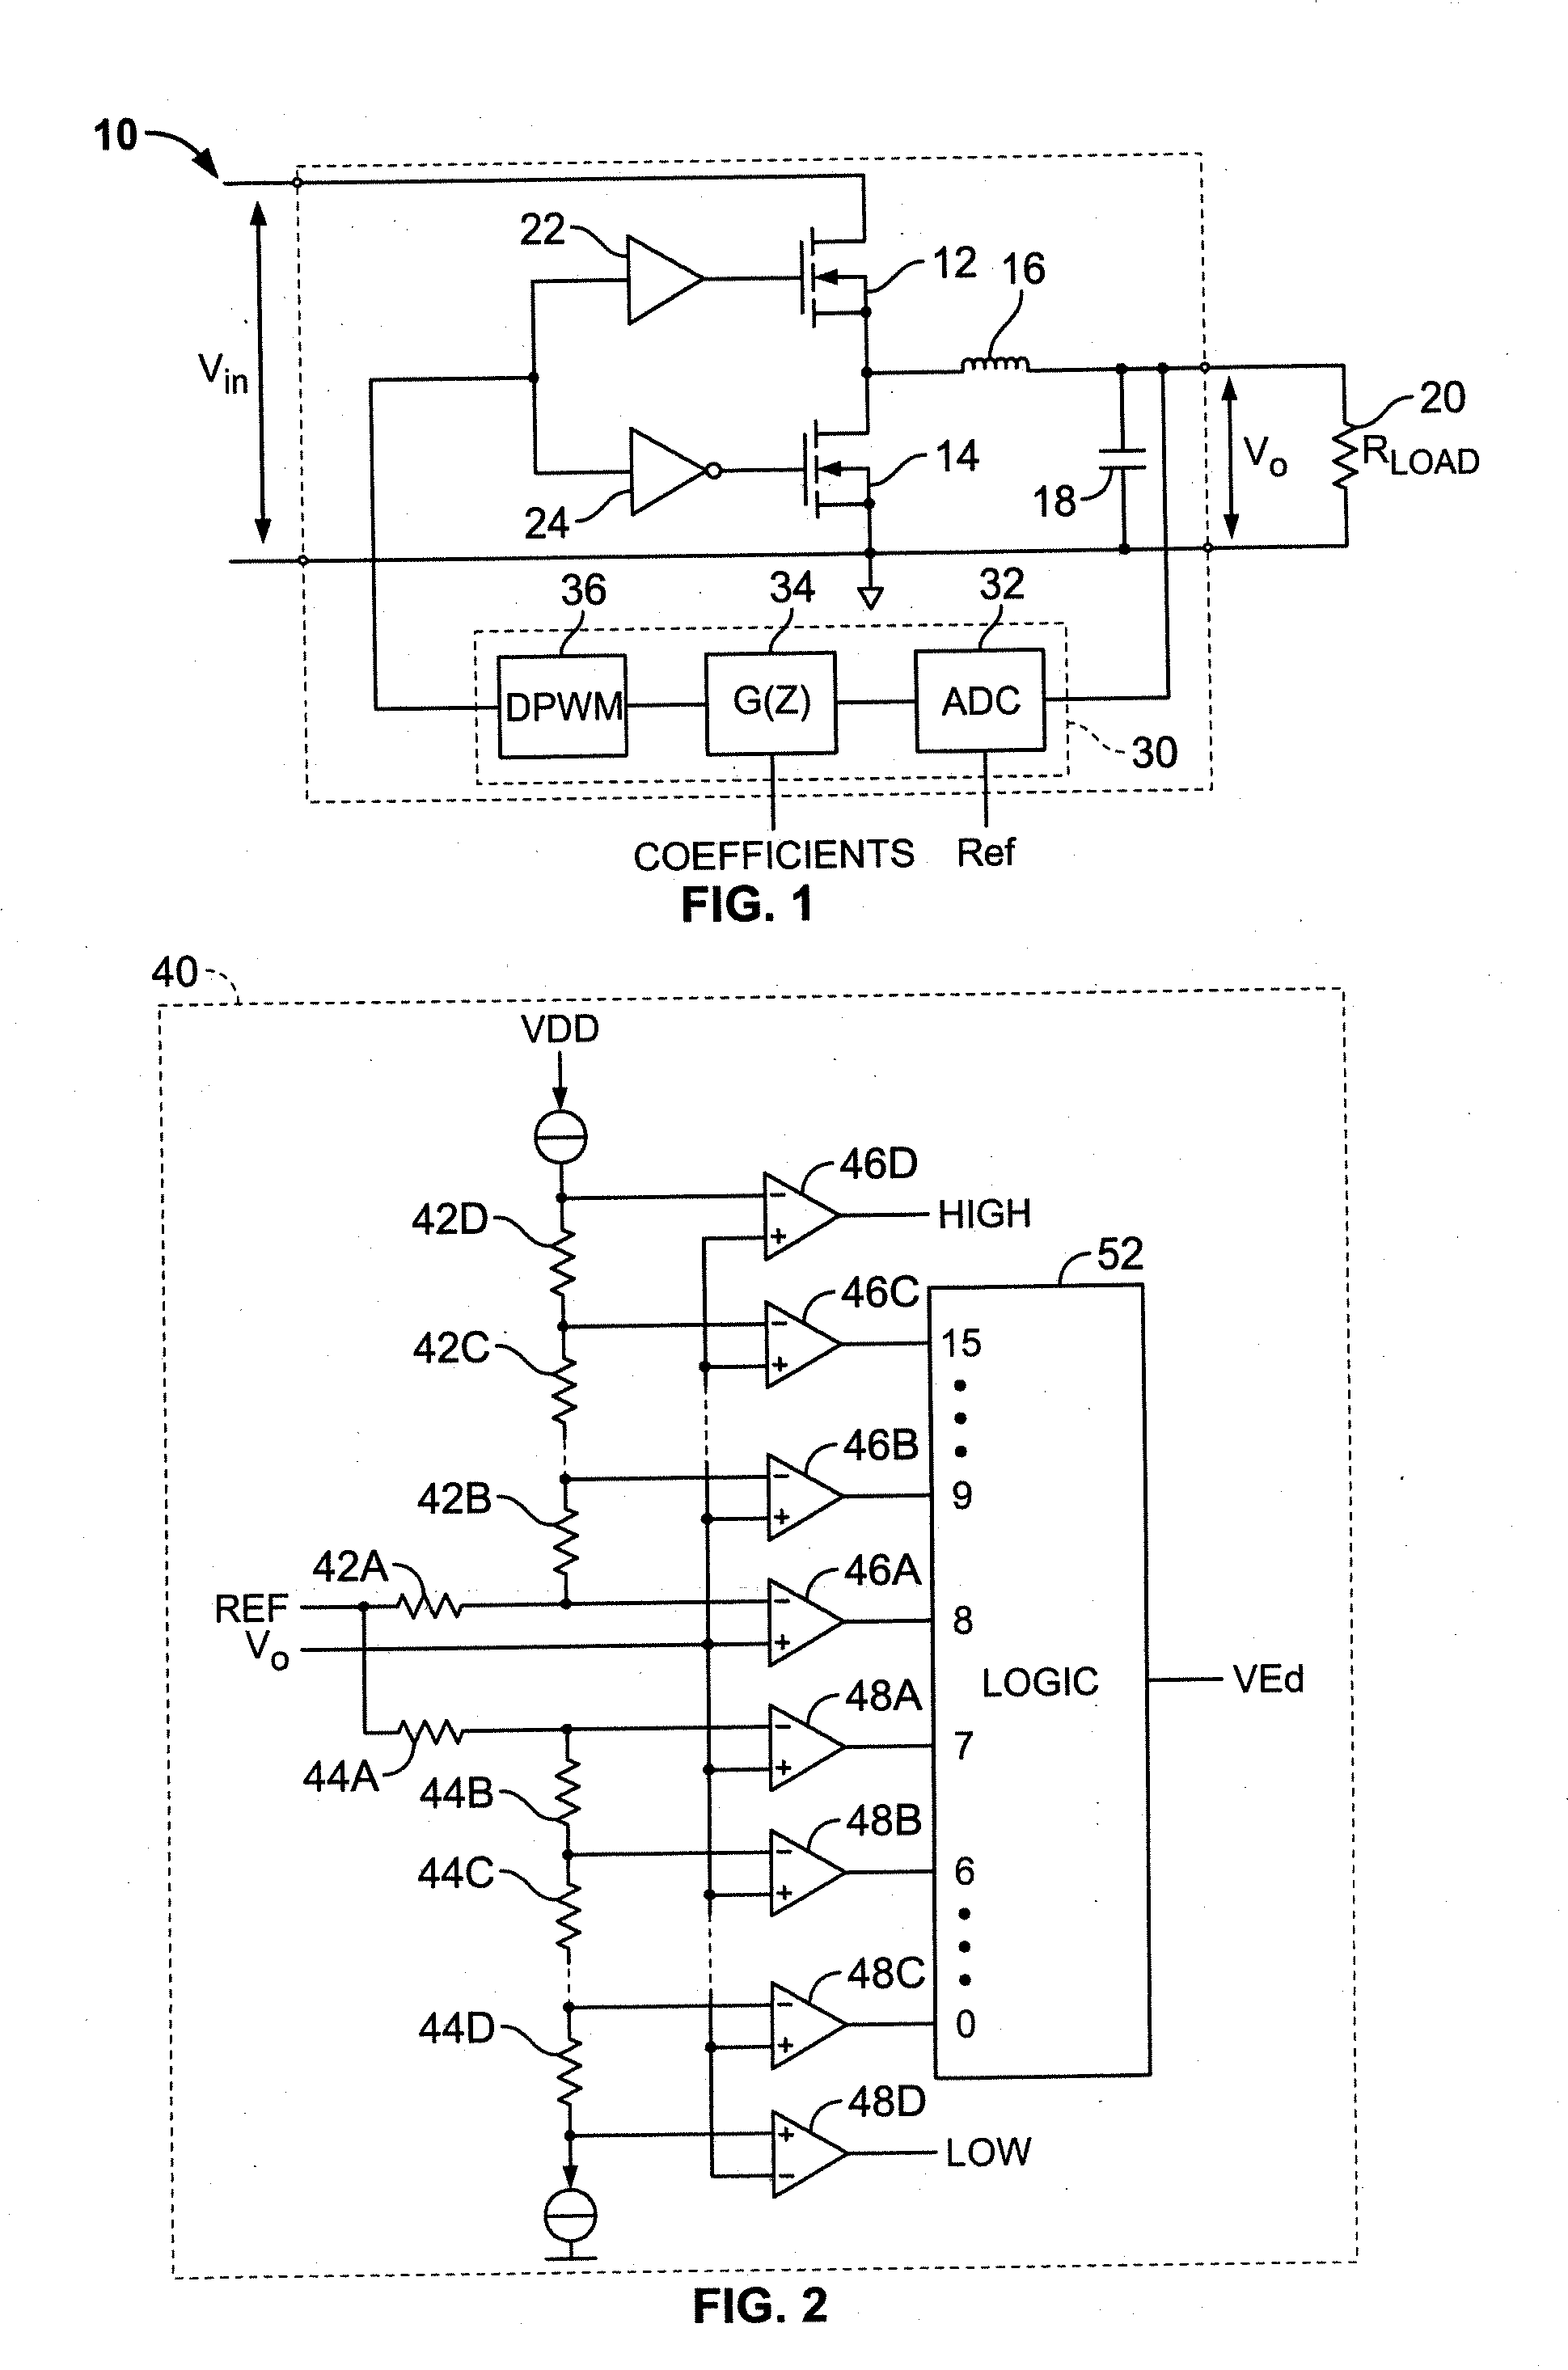 Method And System For Optimizing Filter Compensation Coefficients For A Digital Power Control System